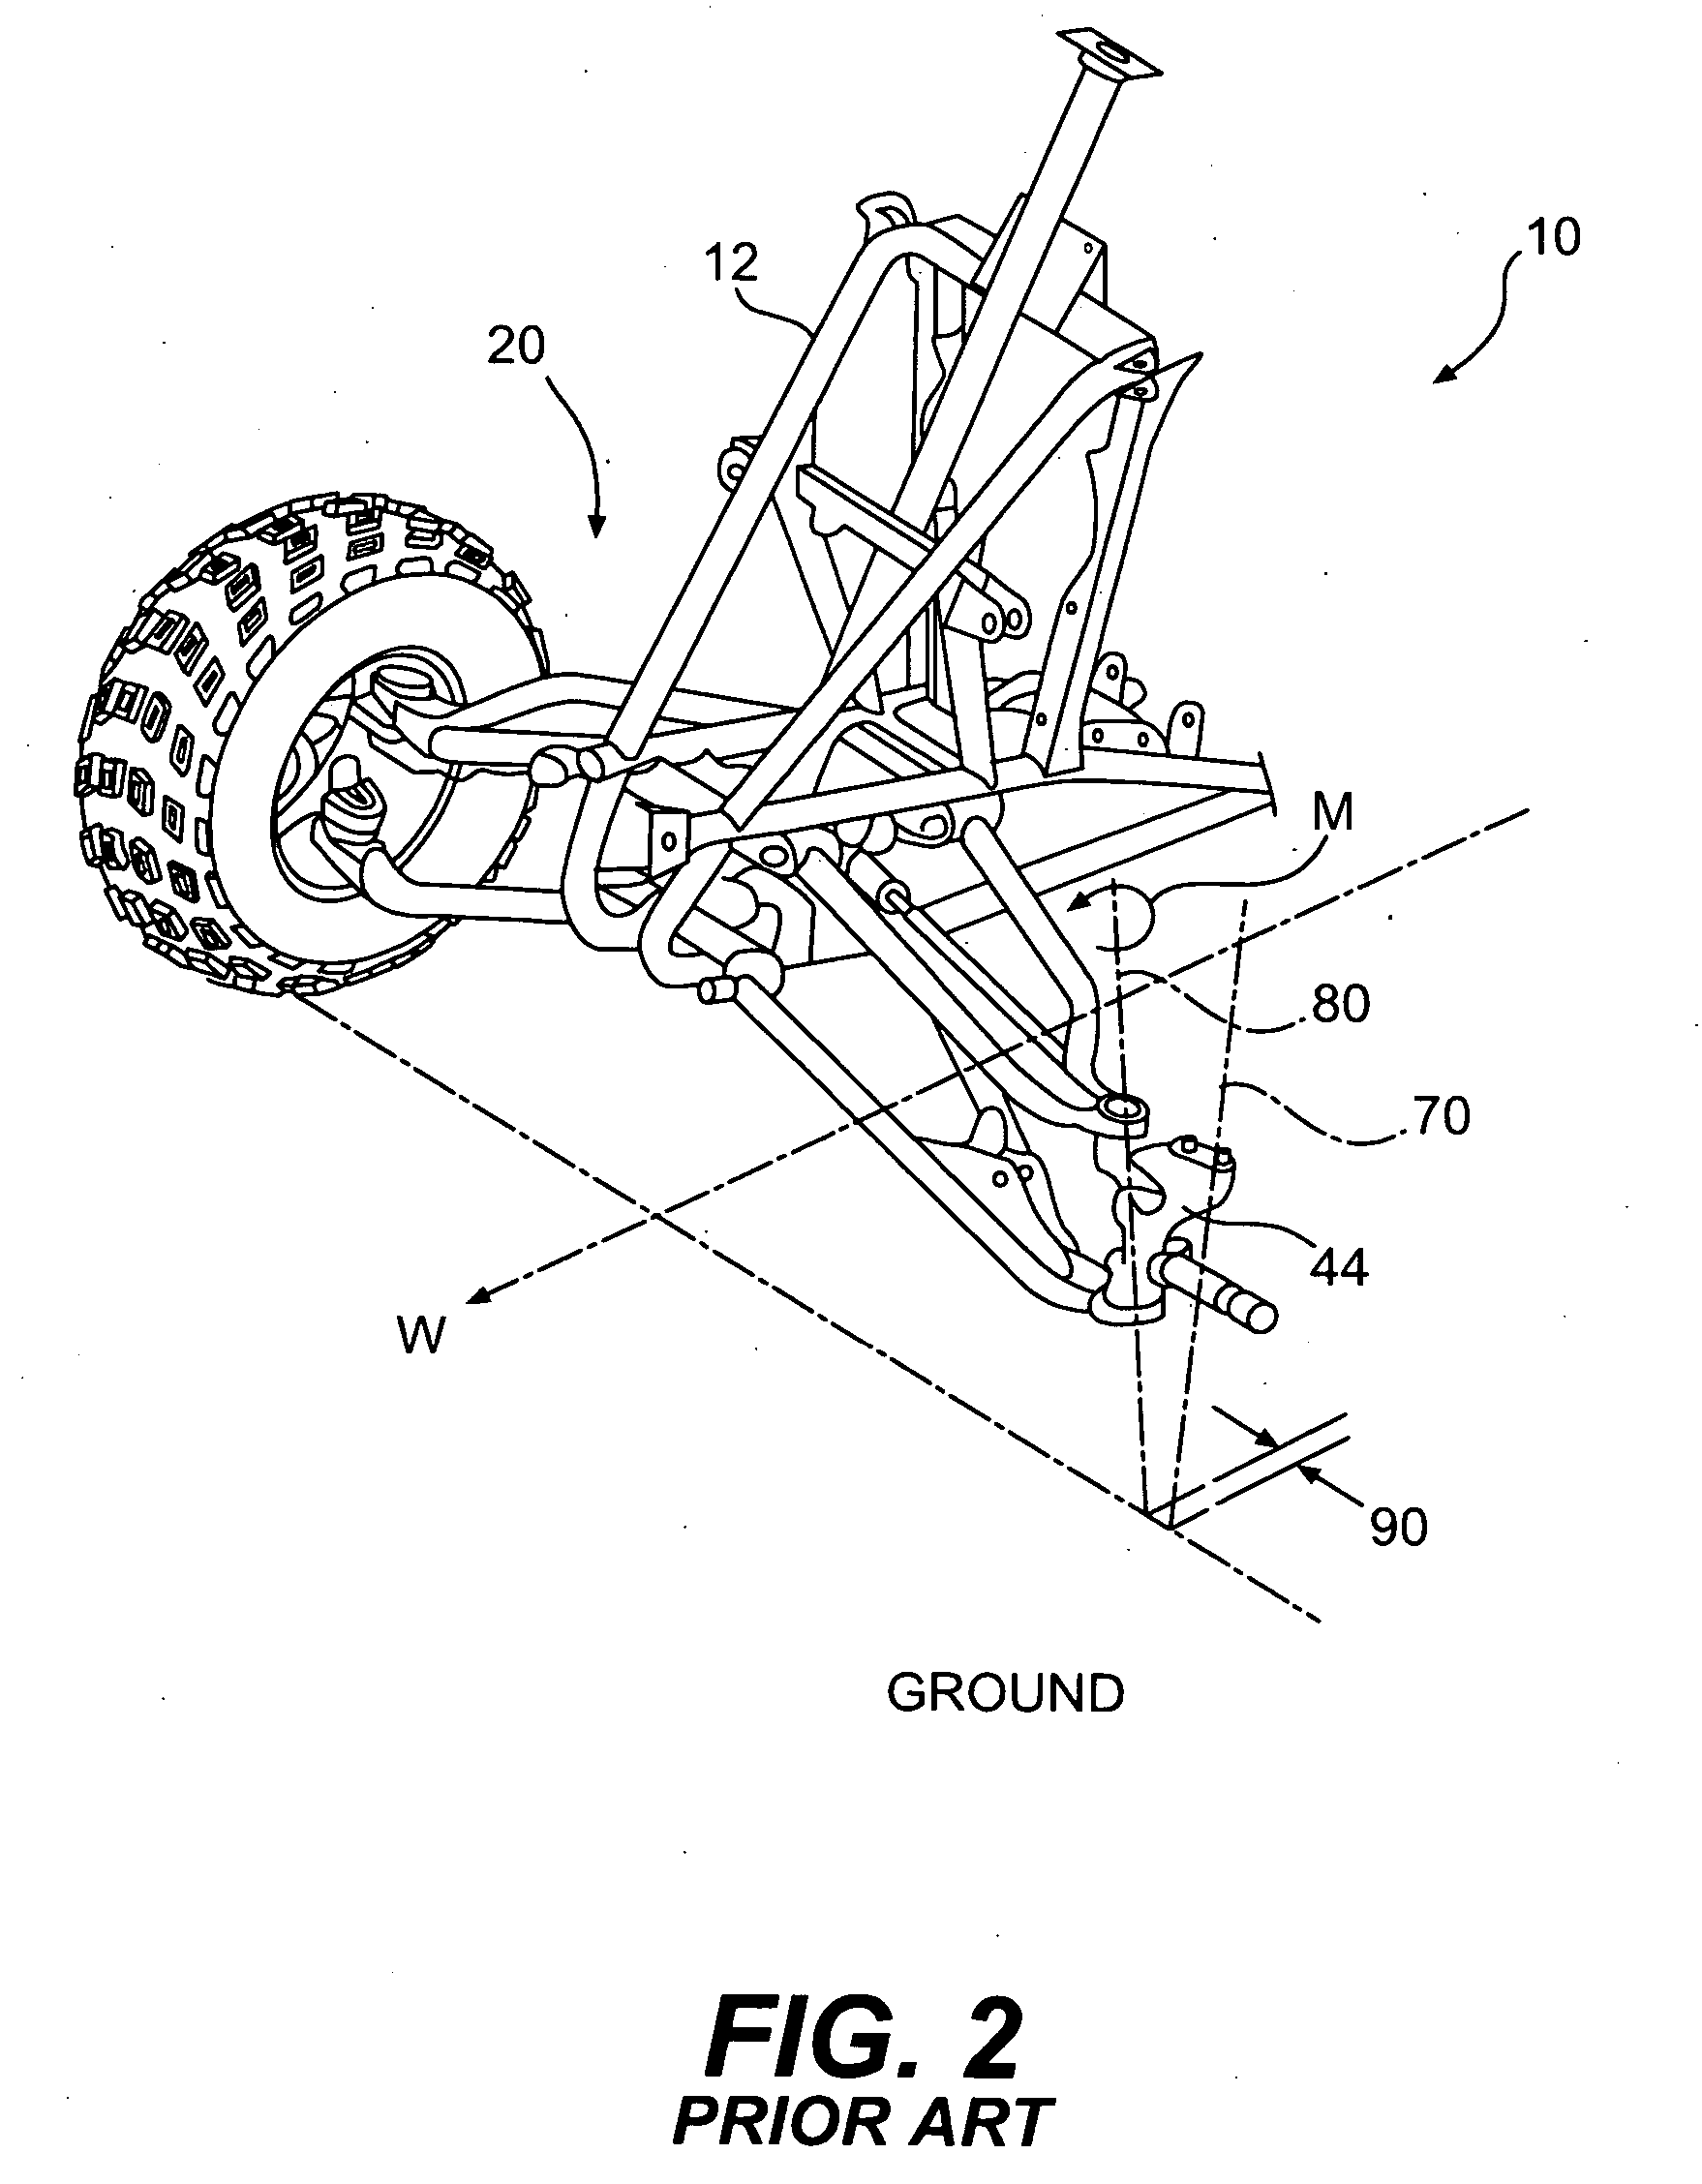 Front drive geometry for an all-terrain vehicle